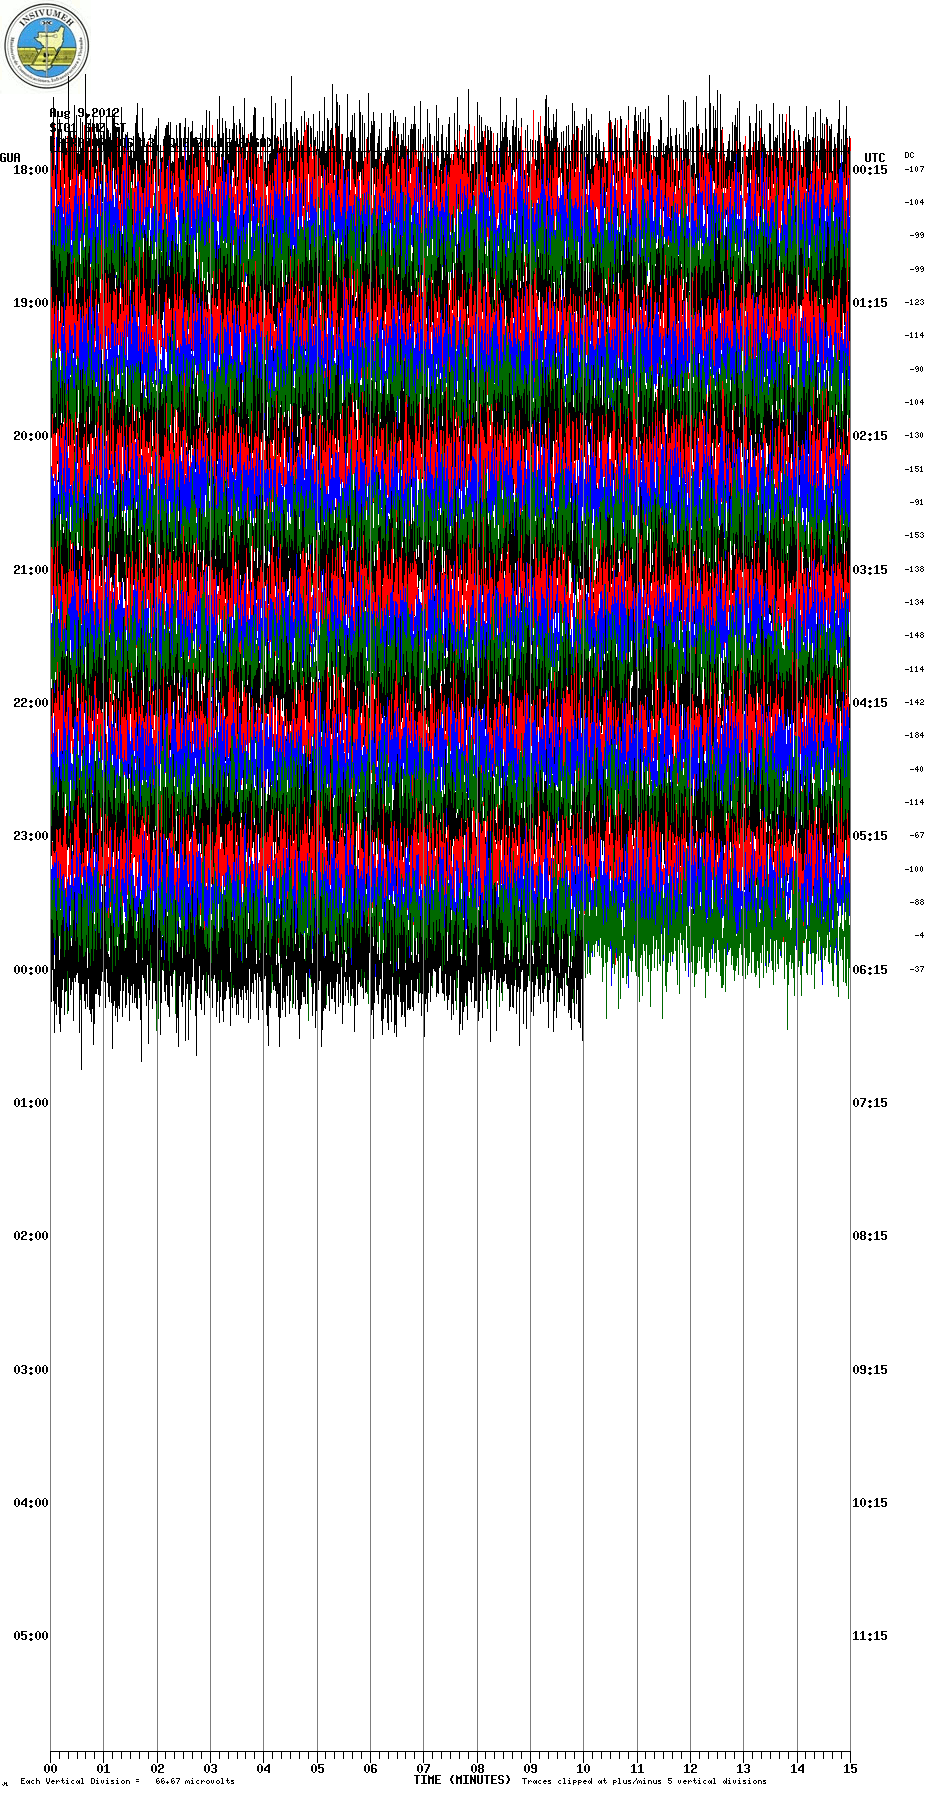 Current seismic signal at Santiaguito, showing the continuing rockfalls from the active lava flows